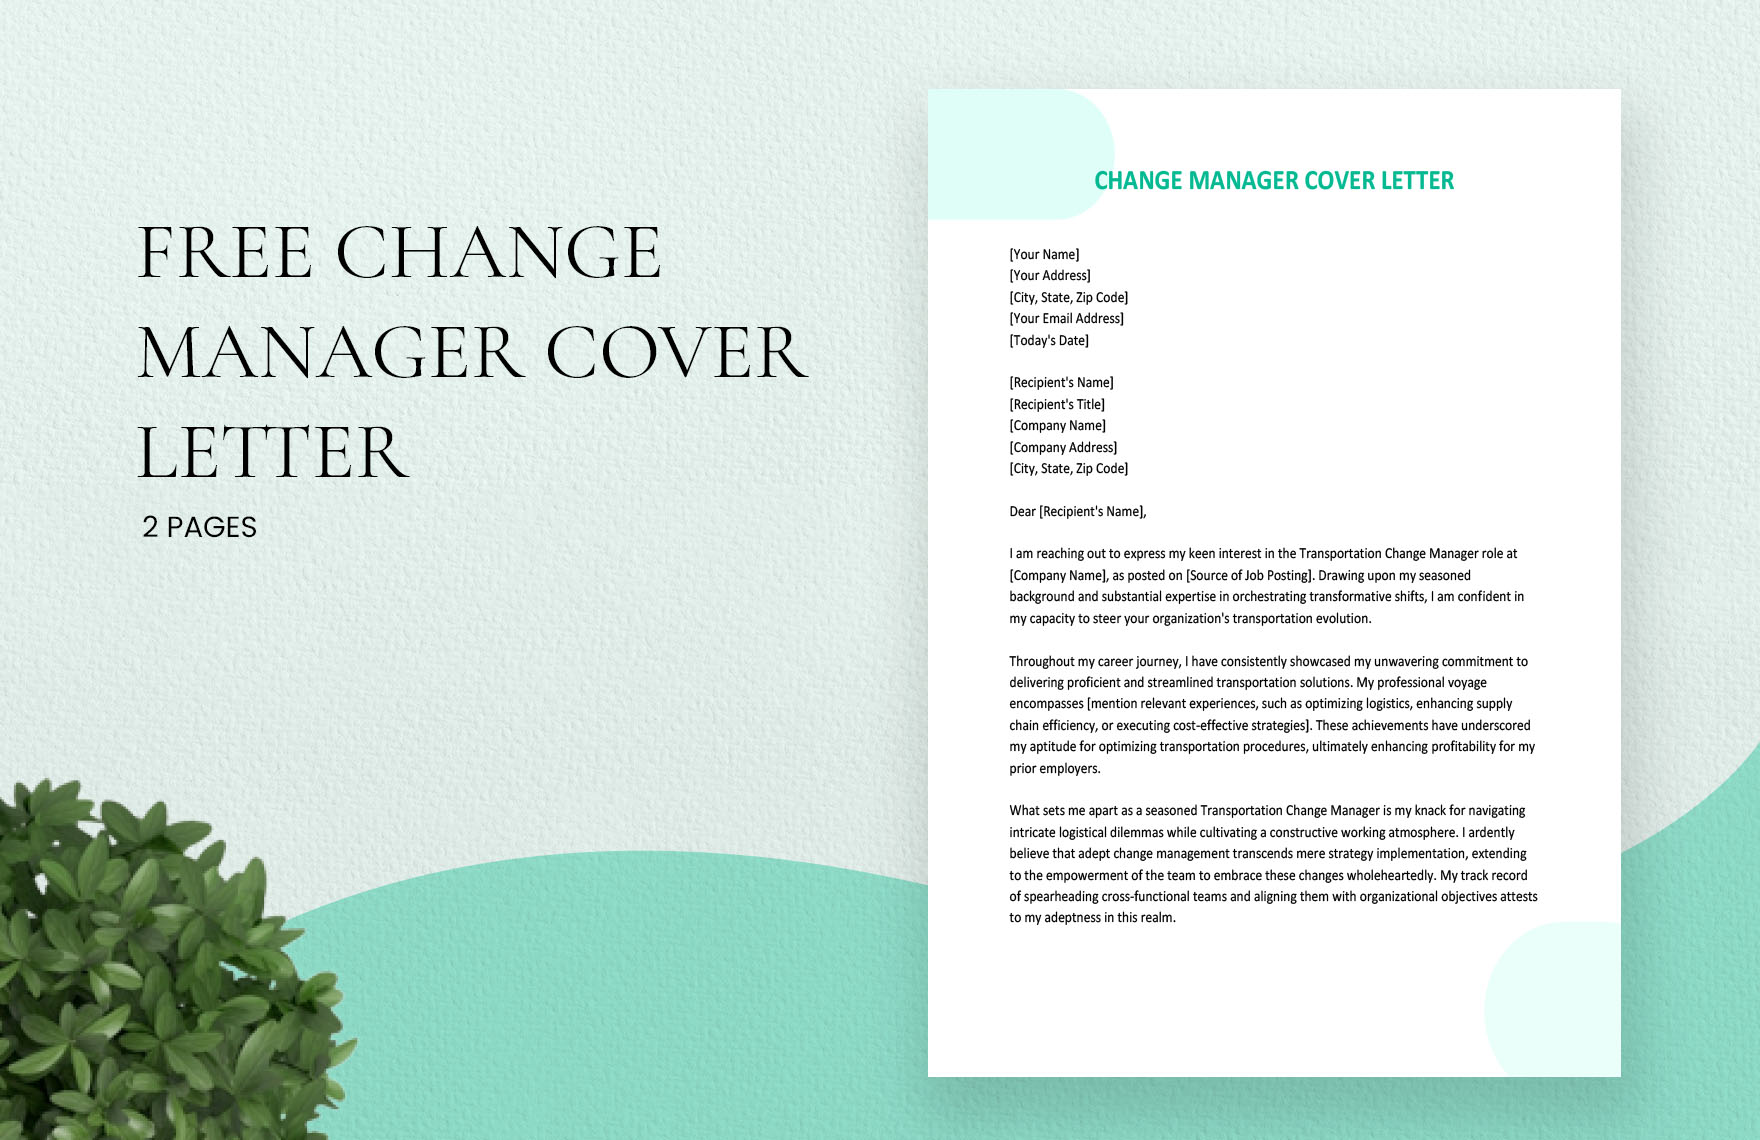 Change Manager Cover Letter